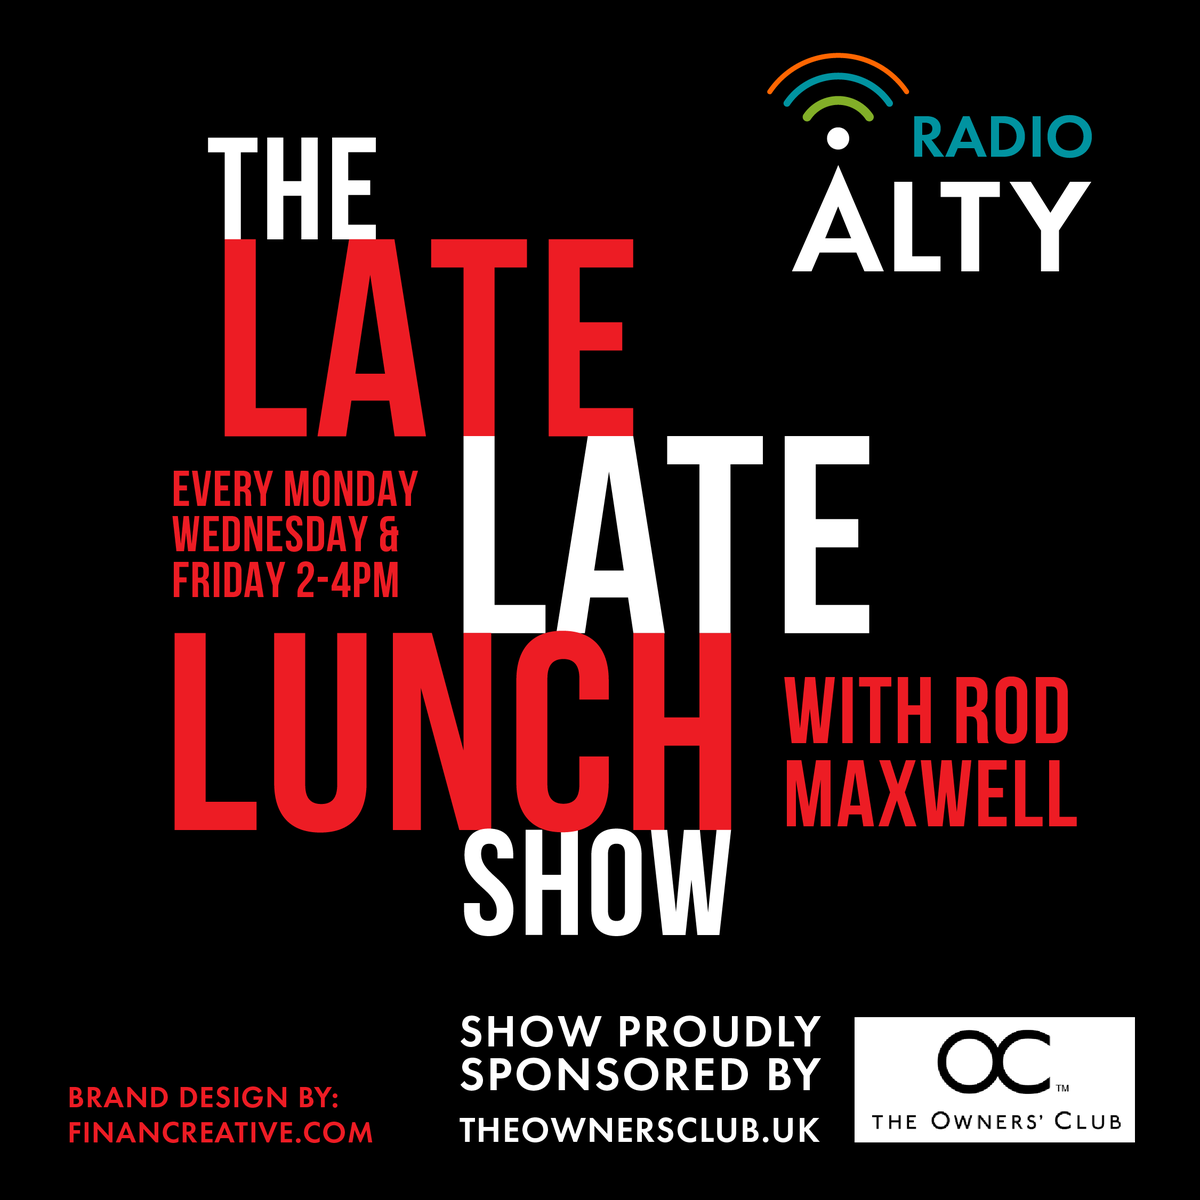 On Wednesday's #theLateLateLunchshow Emily & Ava are back & talking about #footballtransfers - the good, bad & worst of all time. Let us know your views - thelatelatelunchshow@gmail.com. Listen live Wednesday 2pm on RadioAlty.co.uk. Supported by The Owners' Club